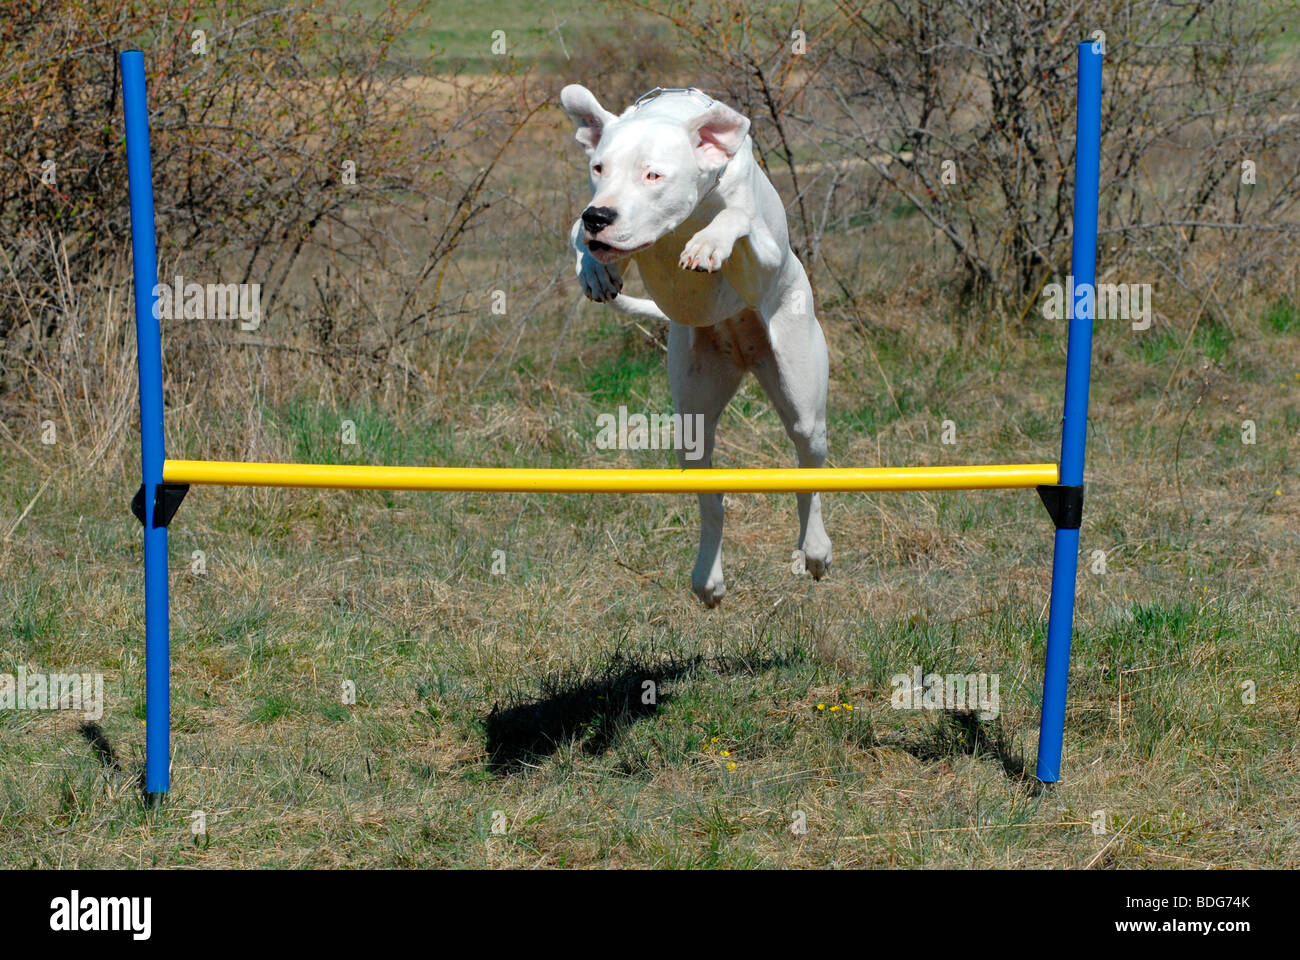 Dogo Argentino jumping over an obstacle Stock Photo